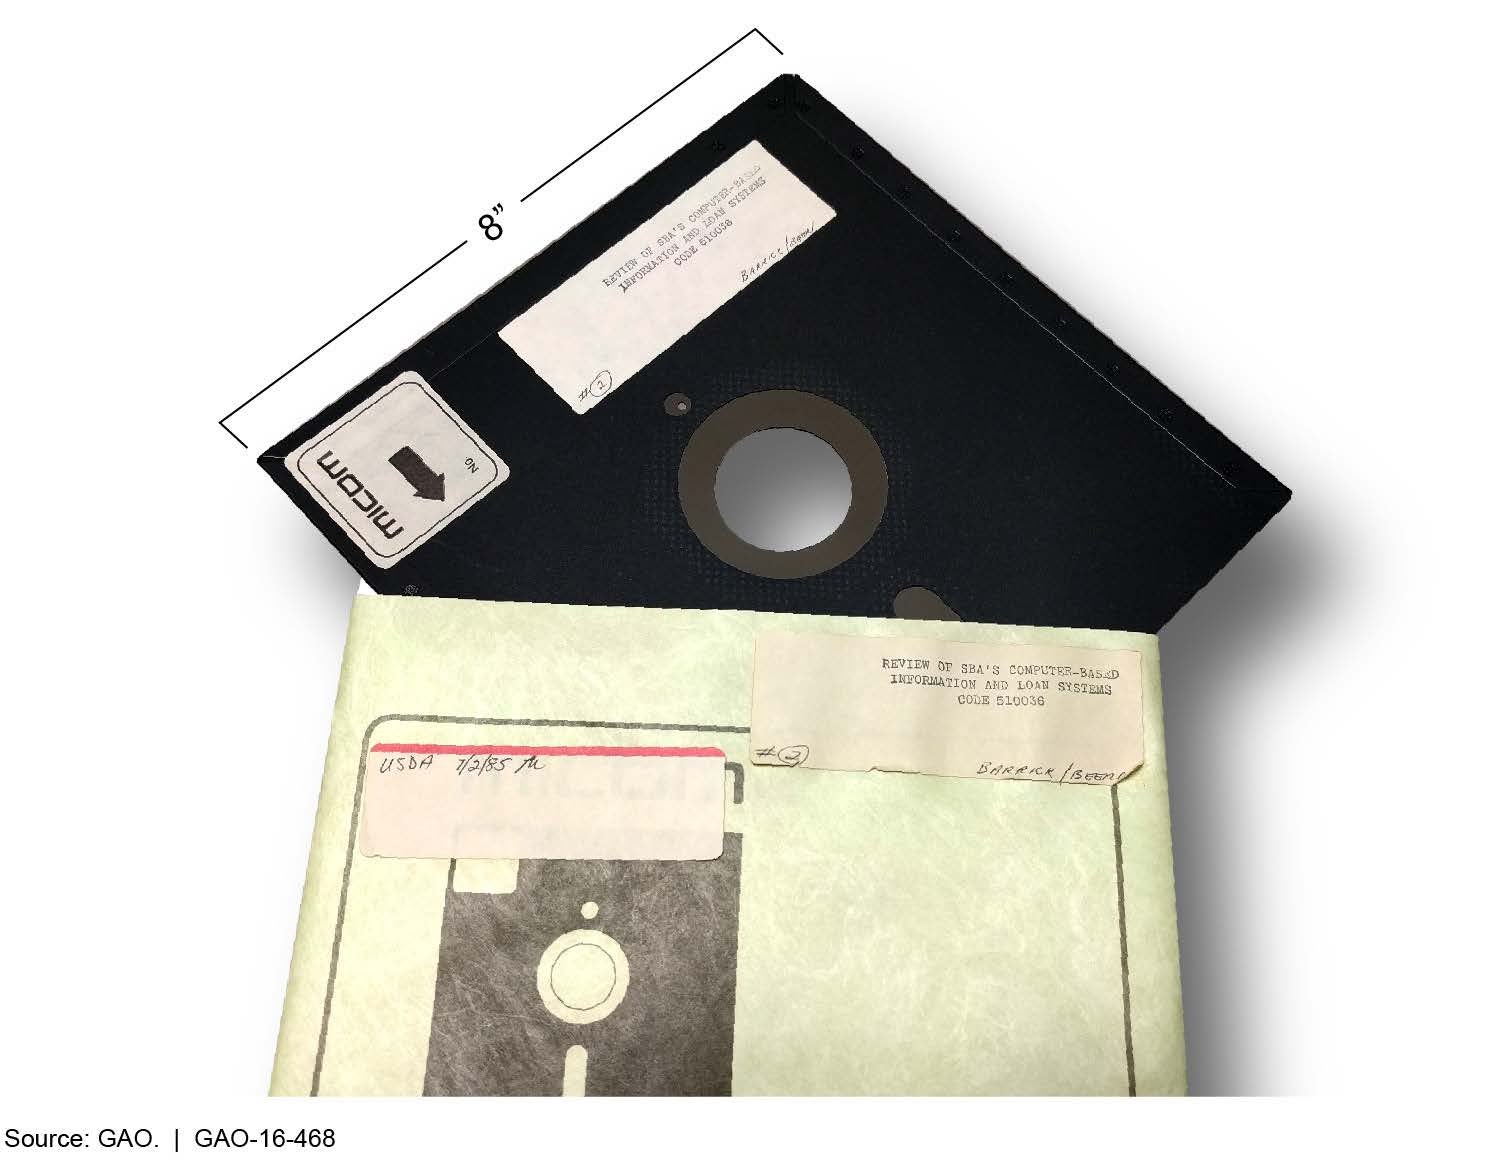 I Miss Using Floppy Disks as Small Treasure Chests for Fanfiction